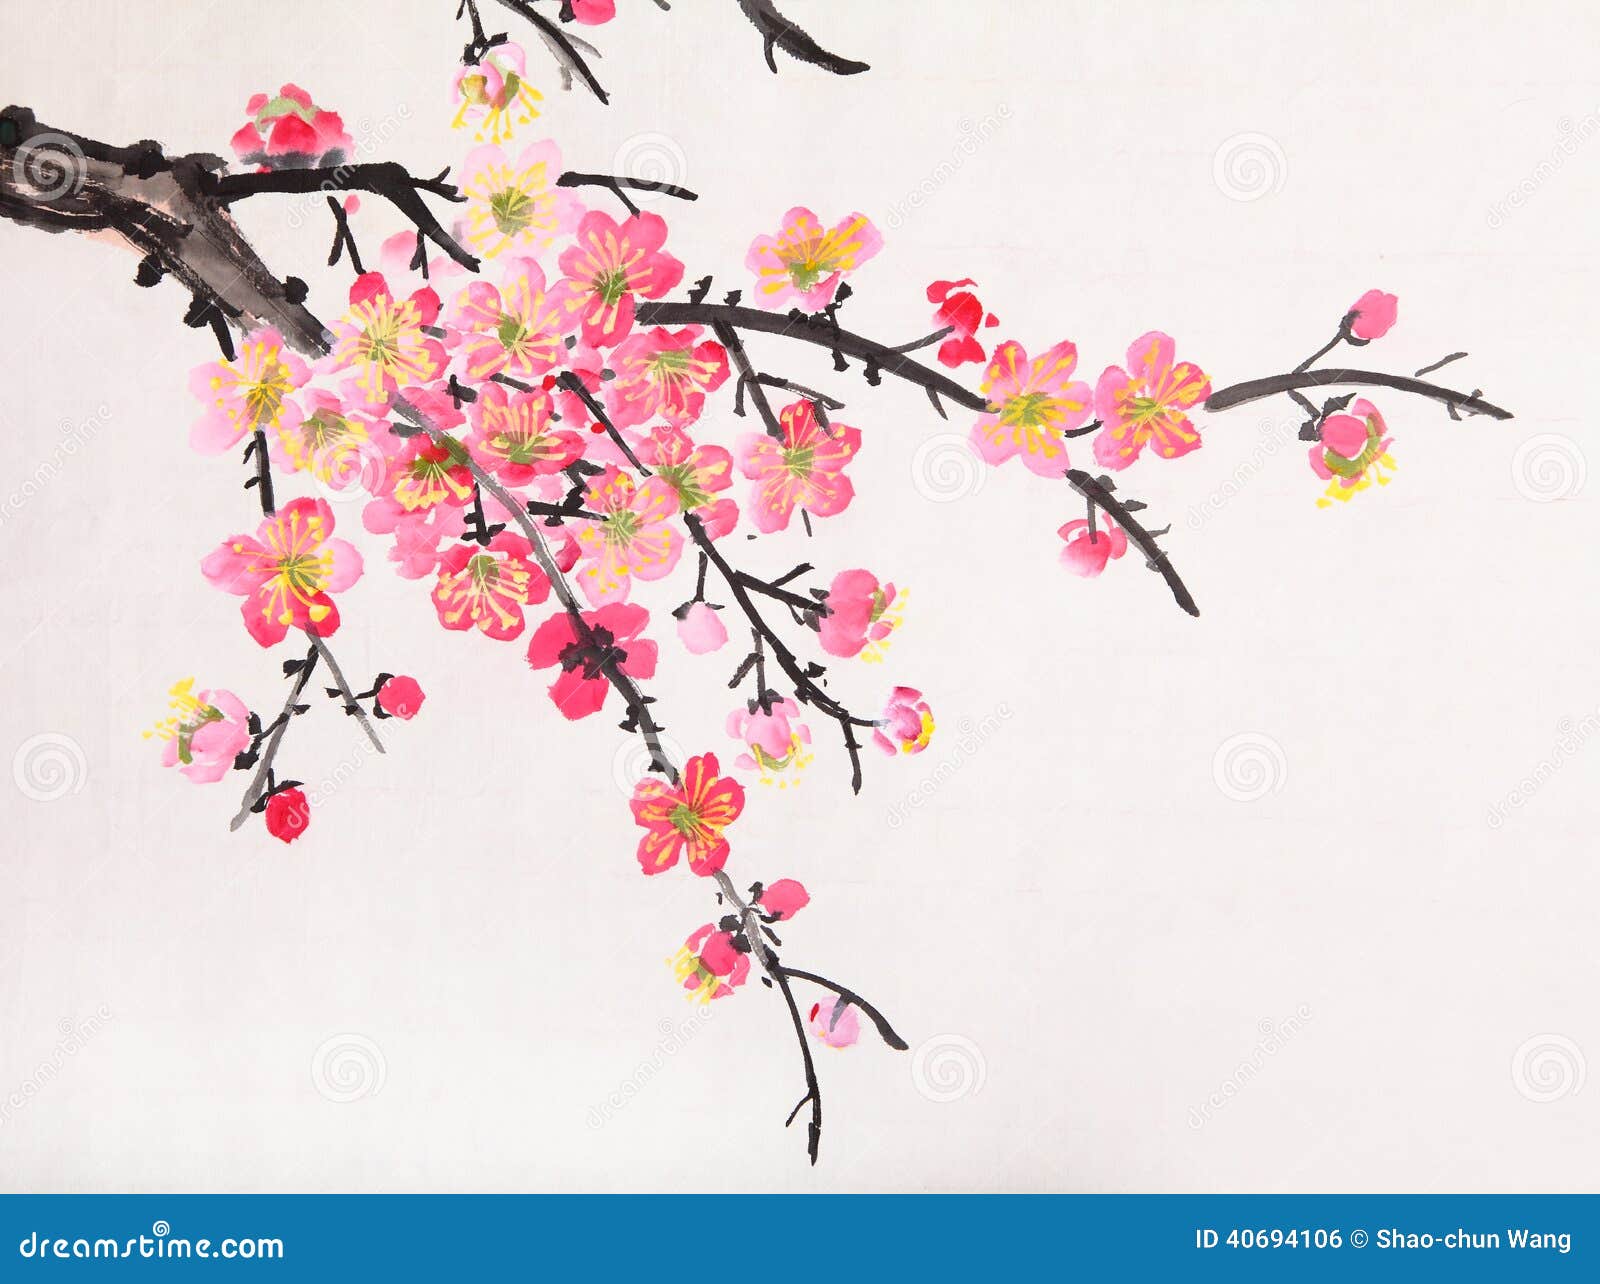 chinese painting of flowers, plum blossom